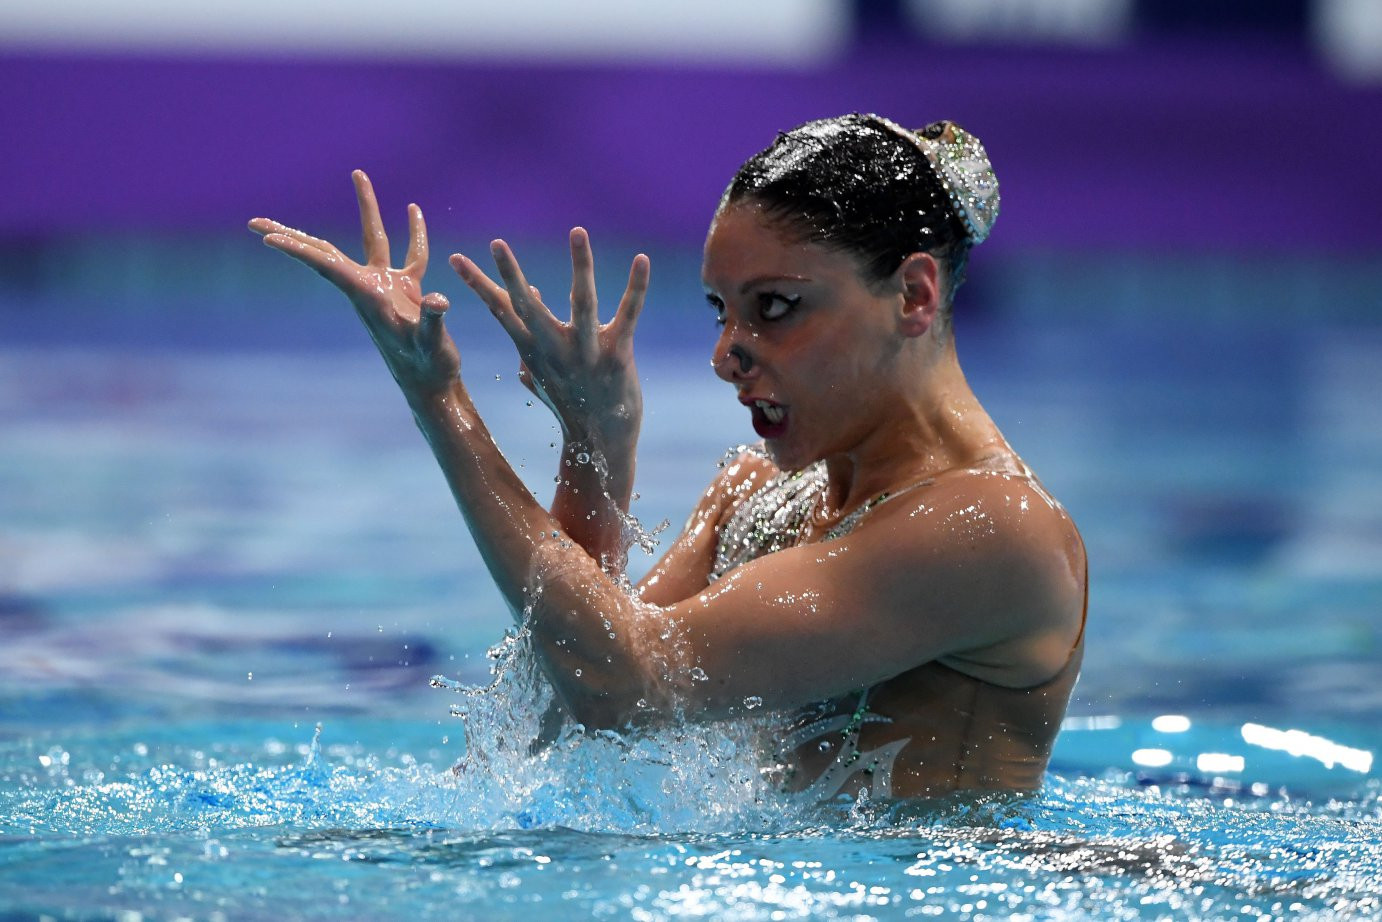 Italy's Linda Cerruti took silver in the solo free event at the FINA Artistic Swimming World Series in Tokyo ©FINA